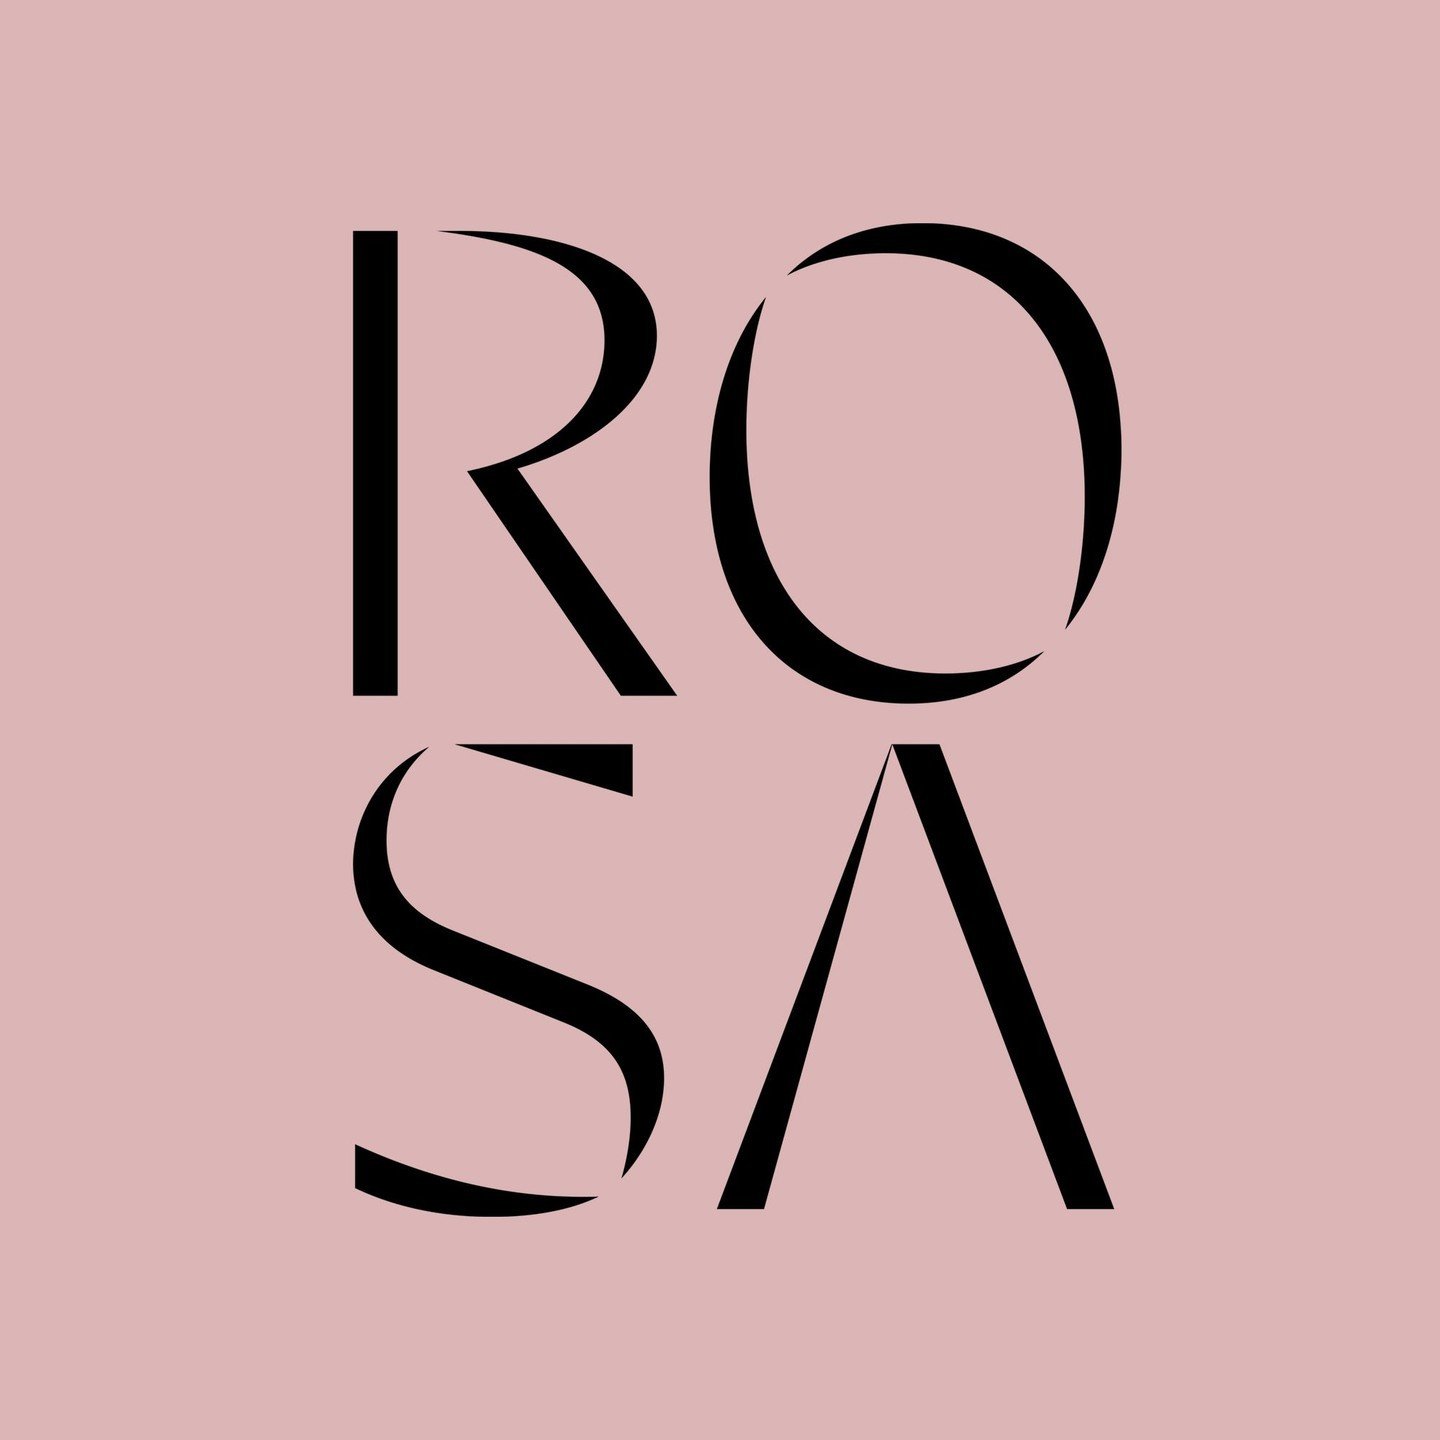 PRIZE ANNOUNCEMENT!

We are introducing a new prize this year sponsored by our good friends at The Review of Sussex Arts (ROSA) Magazine who have been closely involved with The Sussex since we launched. Their Editor Alex Leith was one of our judges f